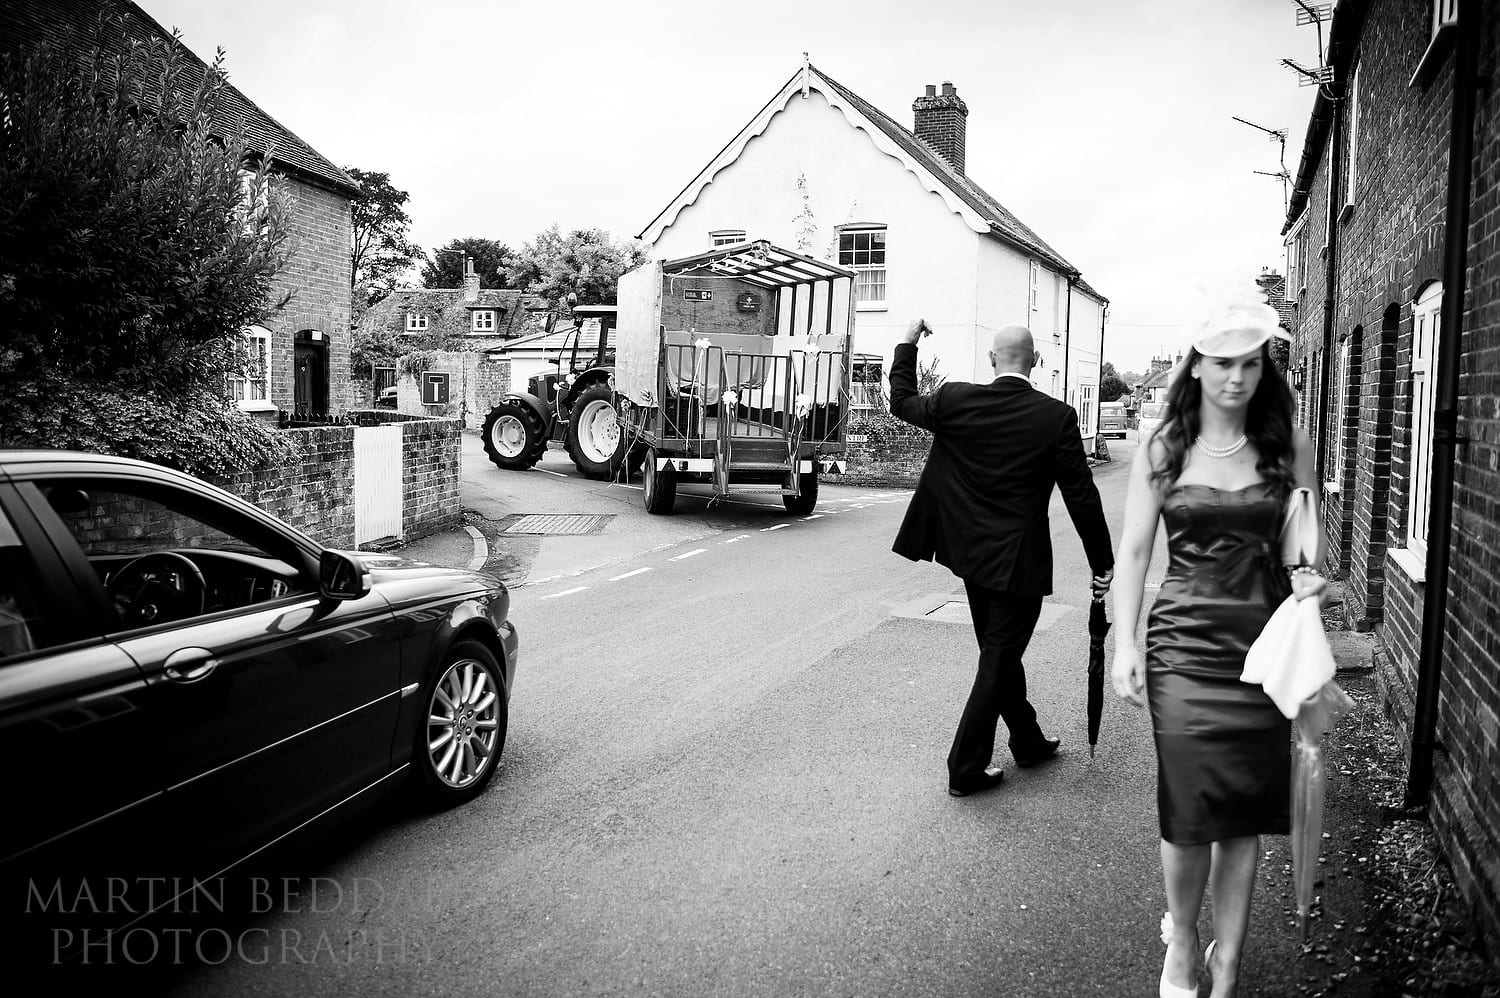 Wedding transport - tractor and trailer